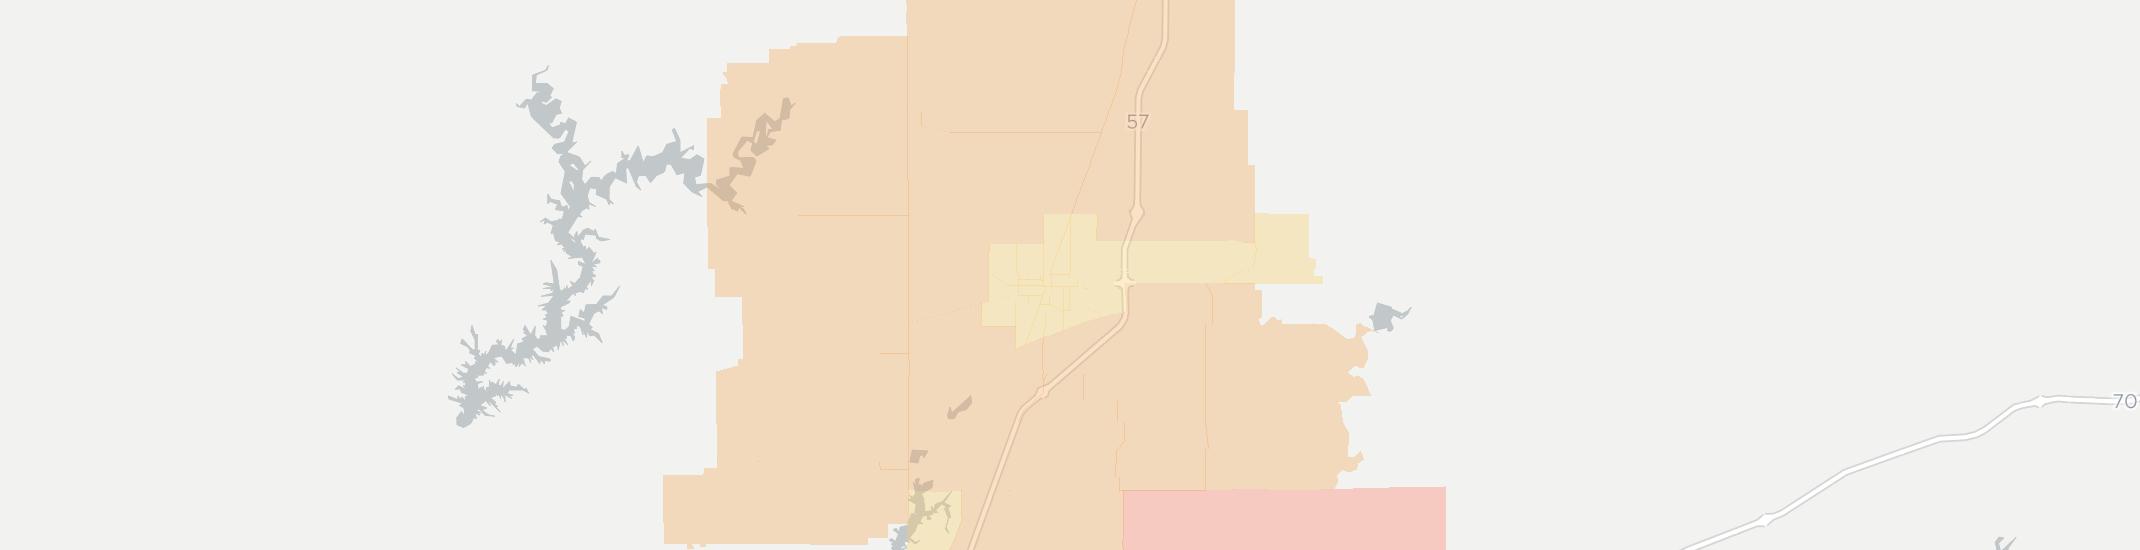 Mattoon Internet Competition Map. Click for interactive map.